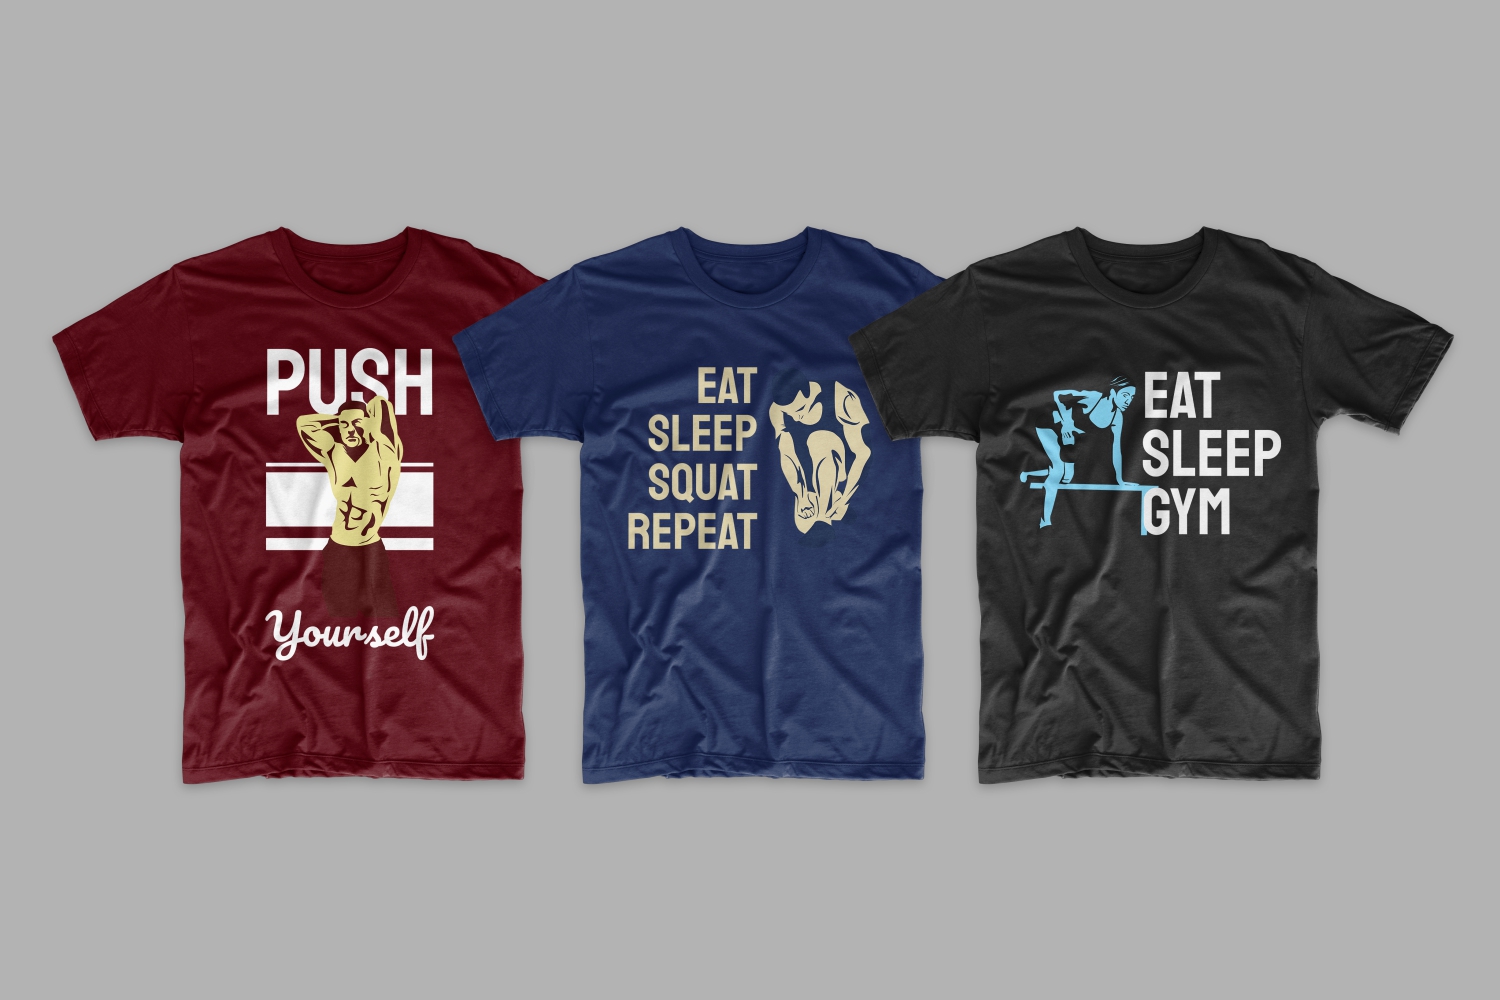 Three T-shirts: blue, burgundy and black with athletes from different sports and a motivating phrase.